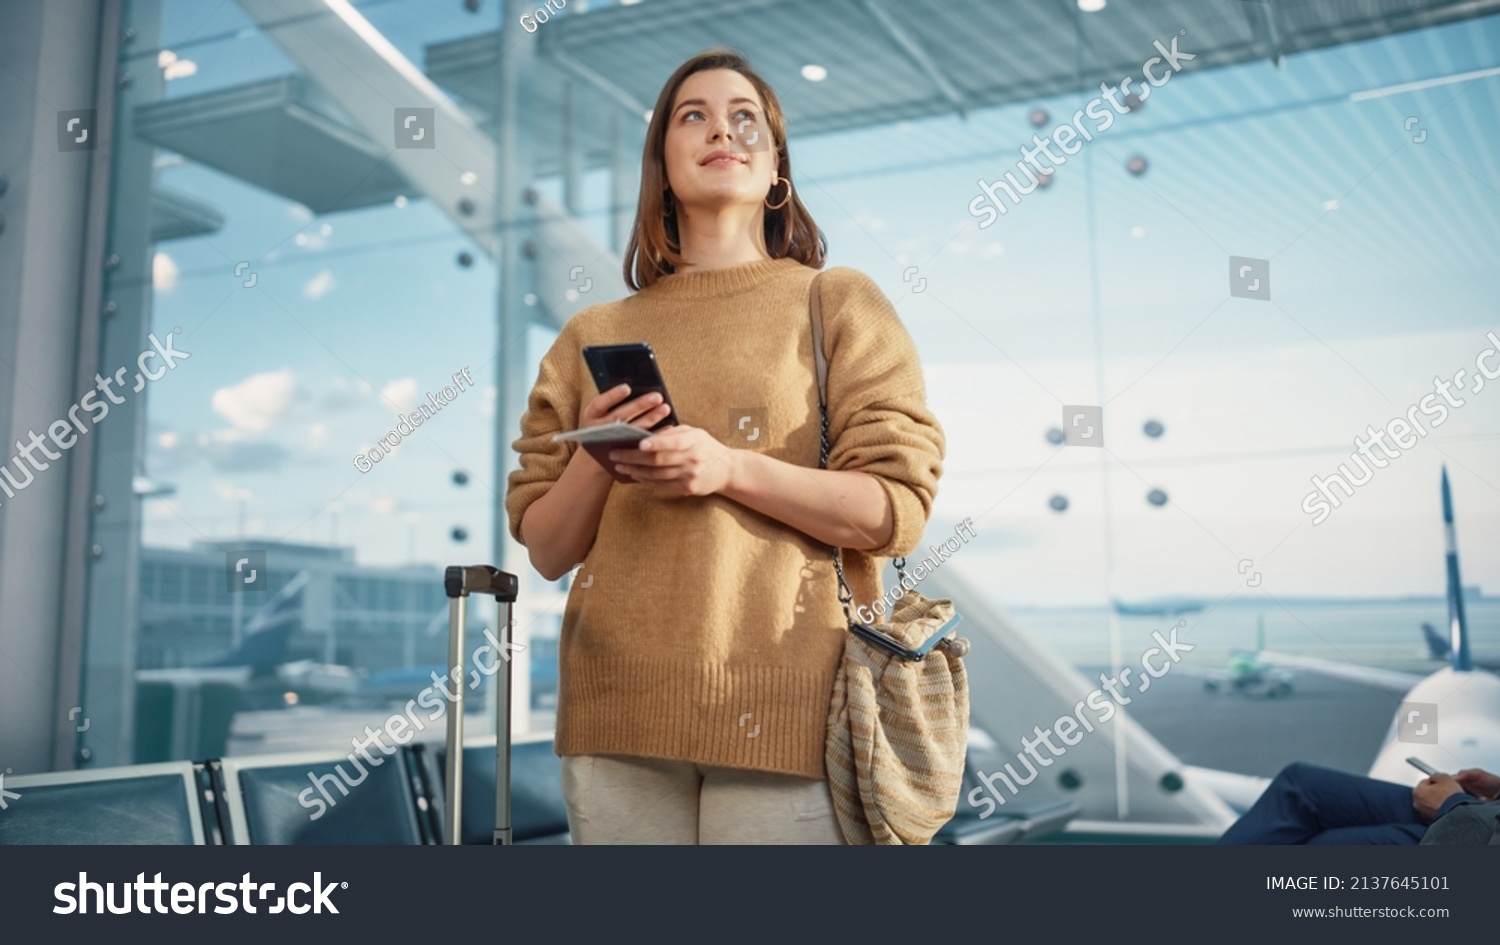 Airport Terminal: Happy Traveling Caucasian Woman Waiting at Flight Gates for Plane Boarding, Uses Mobile Smartphone, Checking Trip Destination on Internet. Smiling White Female in Airline Hub #2137645101